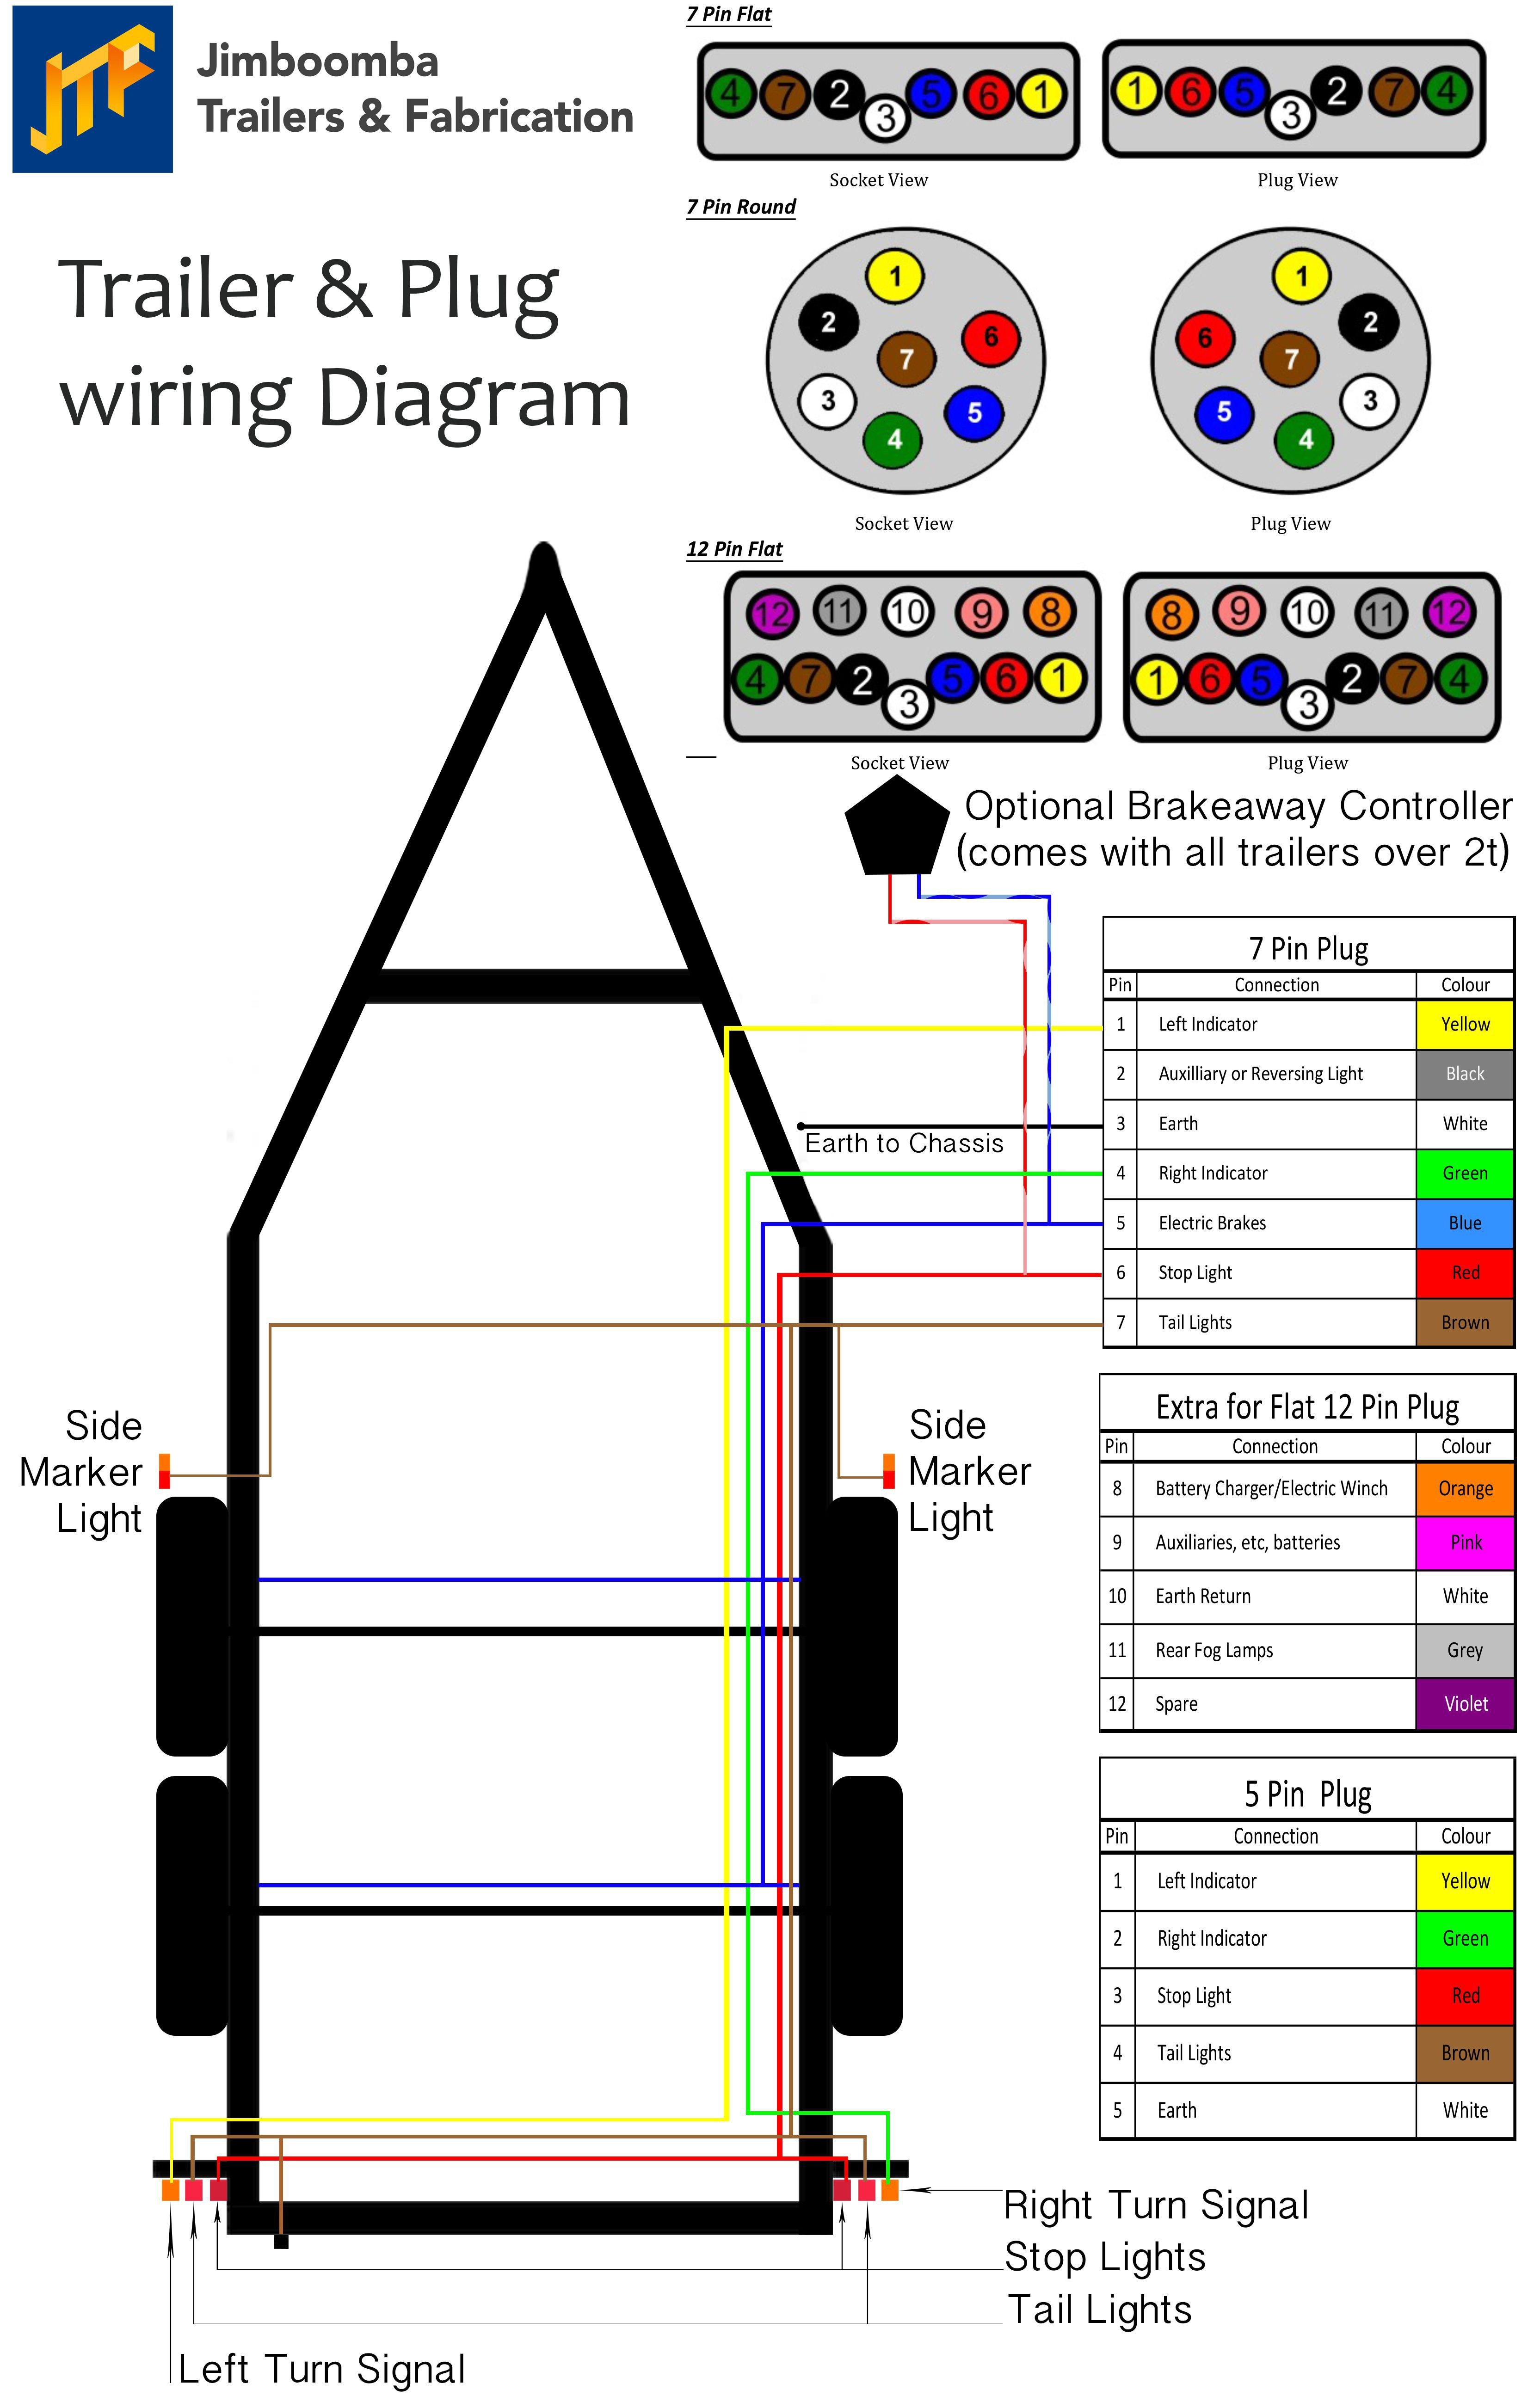 4 Wire Trailer Wiring Diagram Troubleshooting Luxury 4 Wire Trailer Wiring Diagram Troubleshooting New Jtf Wiring